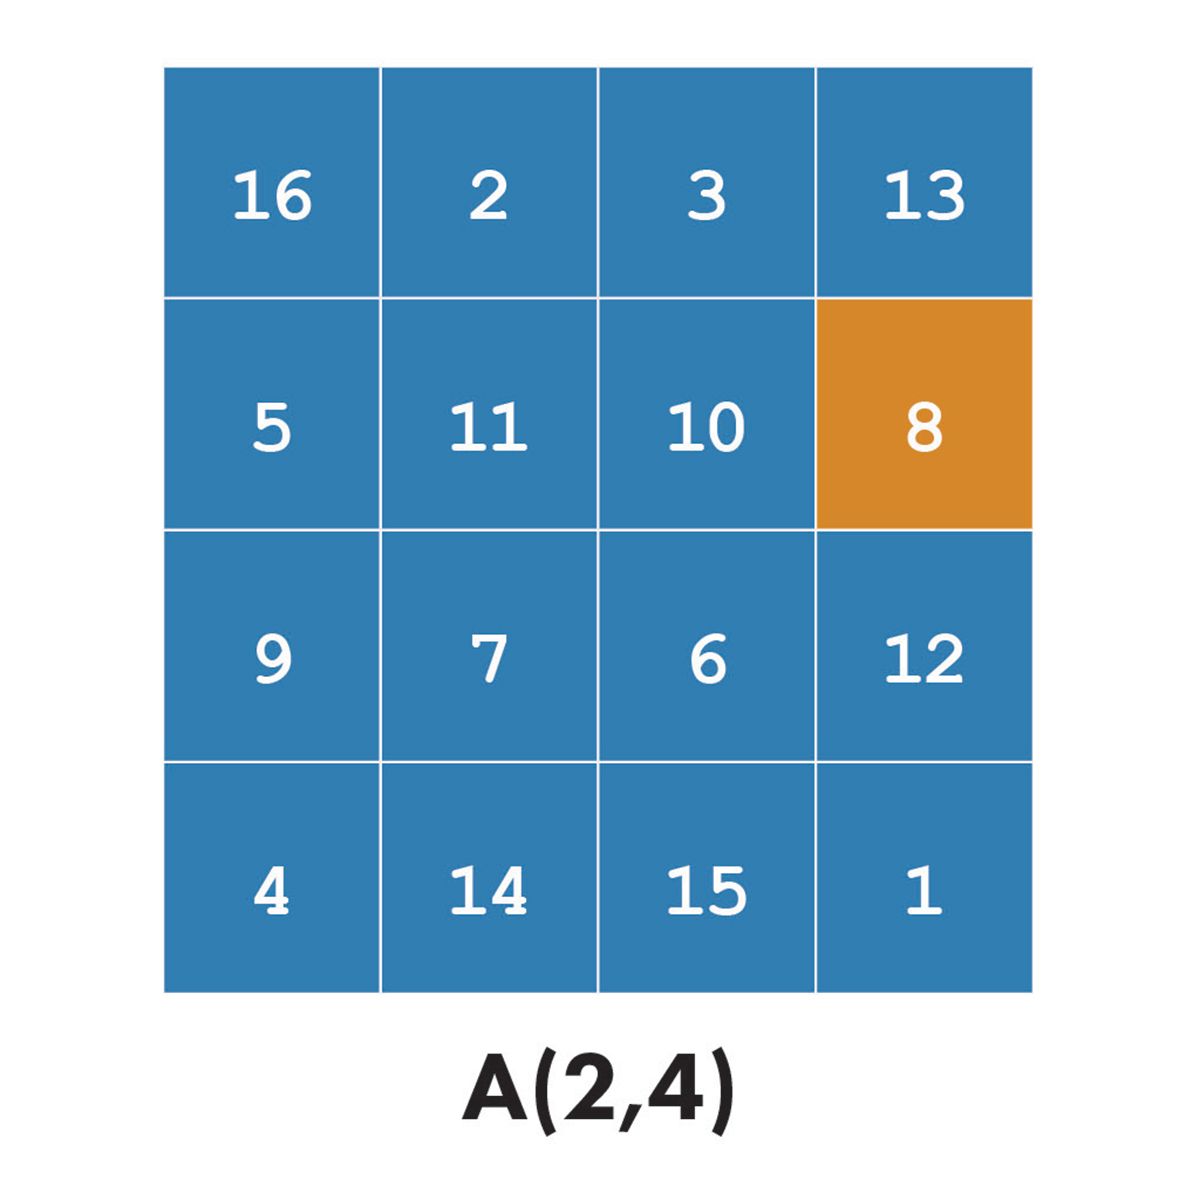 A 4x4 matrix A, with highlighted value 8, representing the number in the second row and fourth column, expressed as A(2,4).